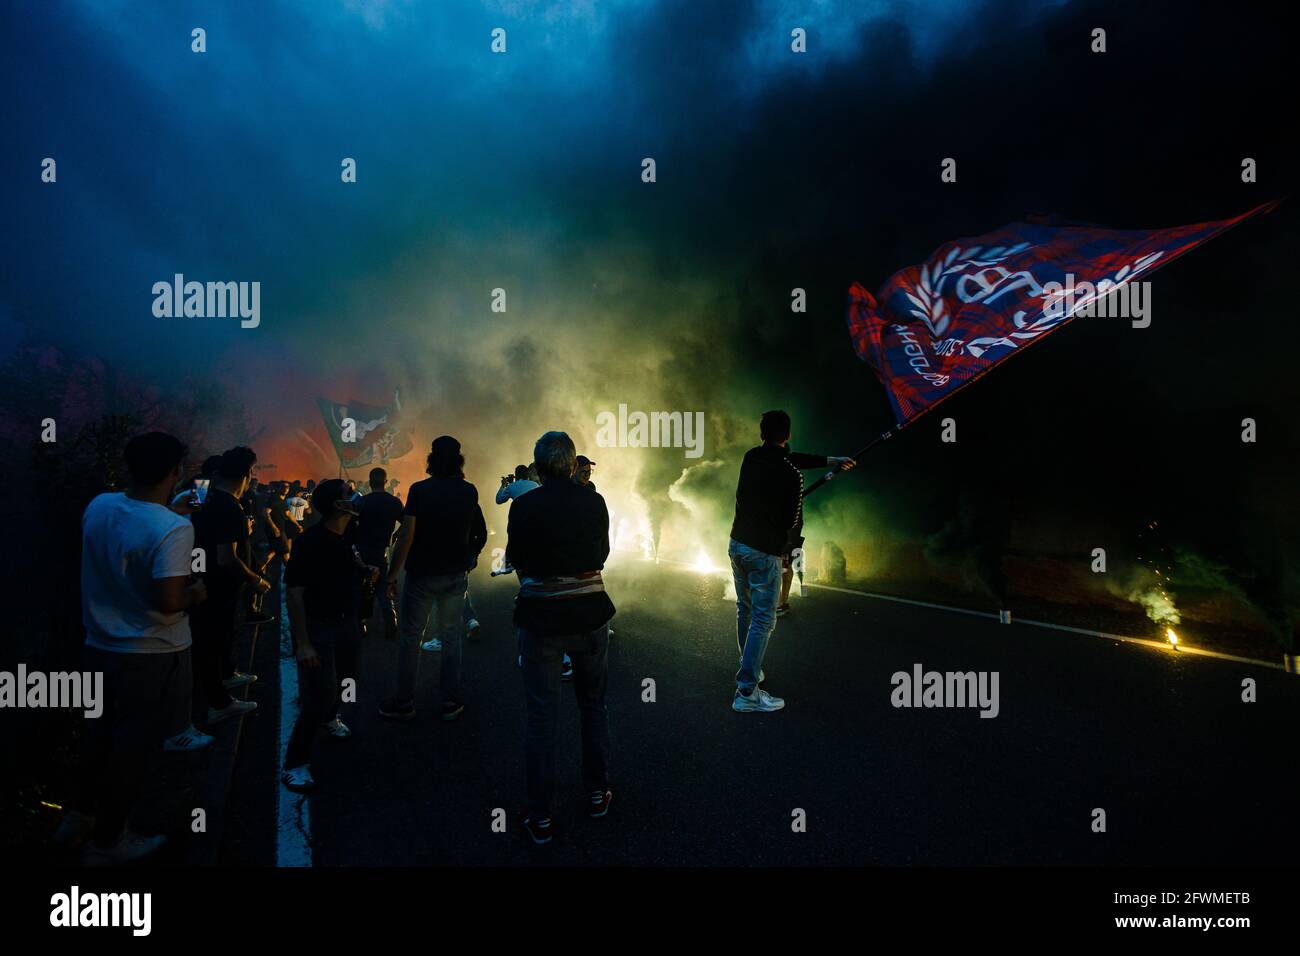 Bologna, Italy. 23rd May, 2021. Bologna FC fans greet the team with flares, scarves and flags prior to the Serie A last match on 2020-21 season from the hill behind of Renato Dall'Ara Stadium. Credit: Massimiliano Donati/Alamy Live News Stock Photo